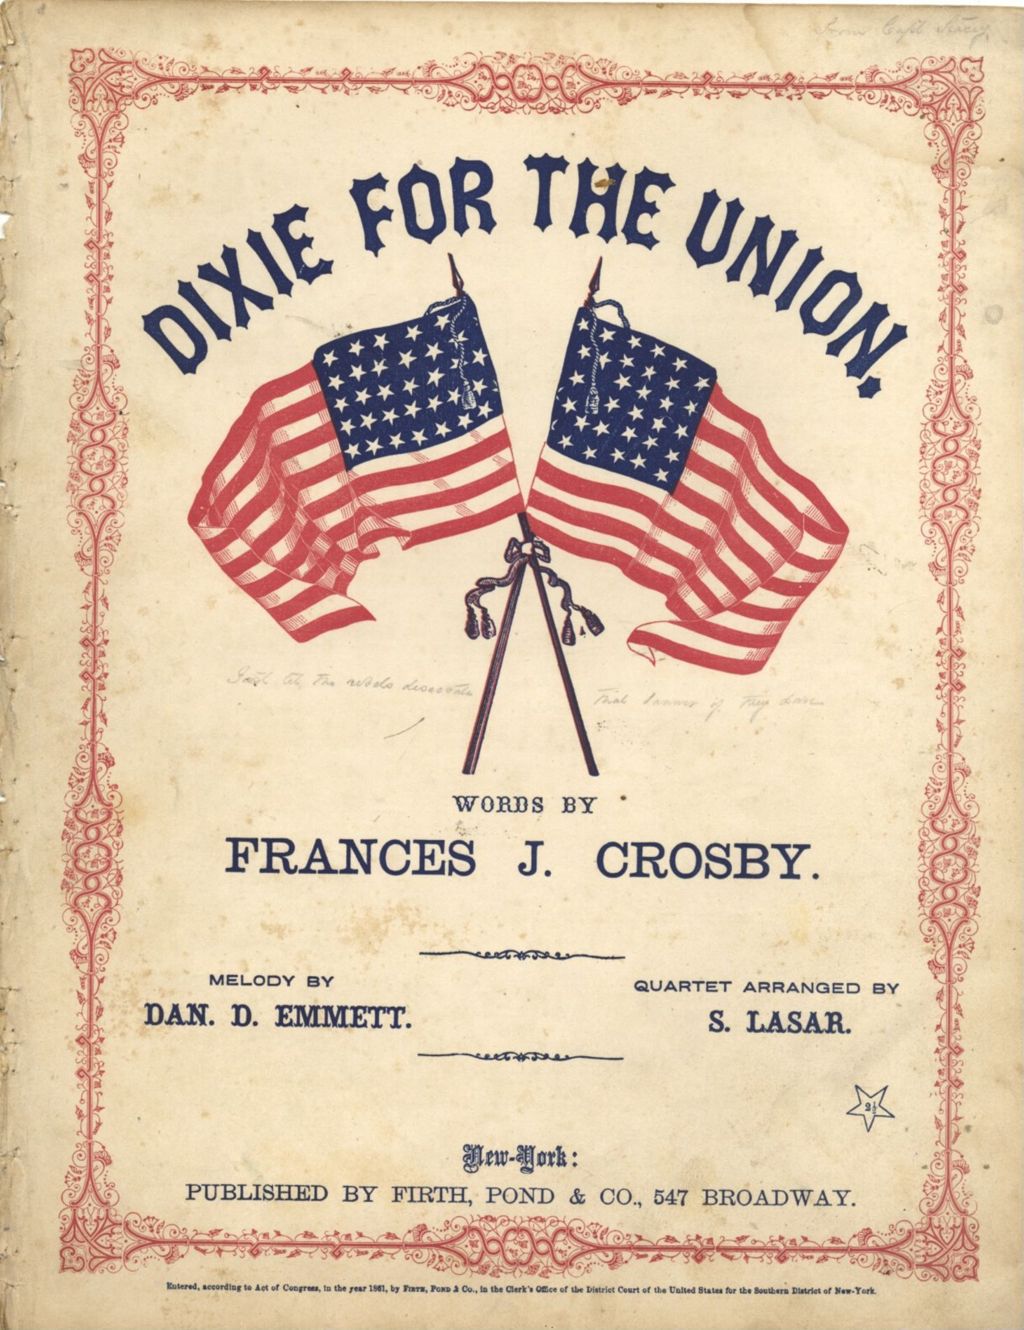 Miniature of Dixie For The Union